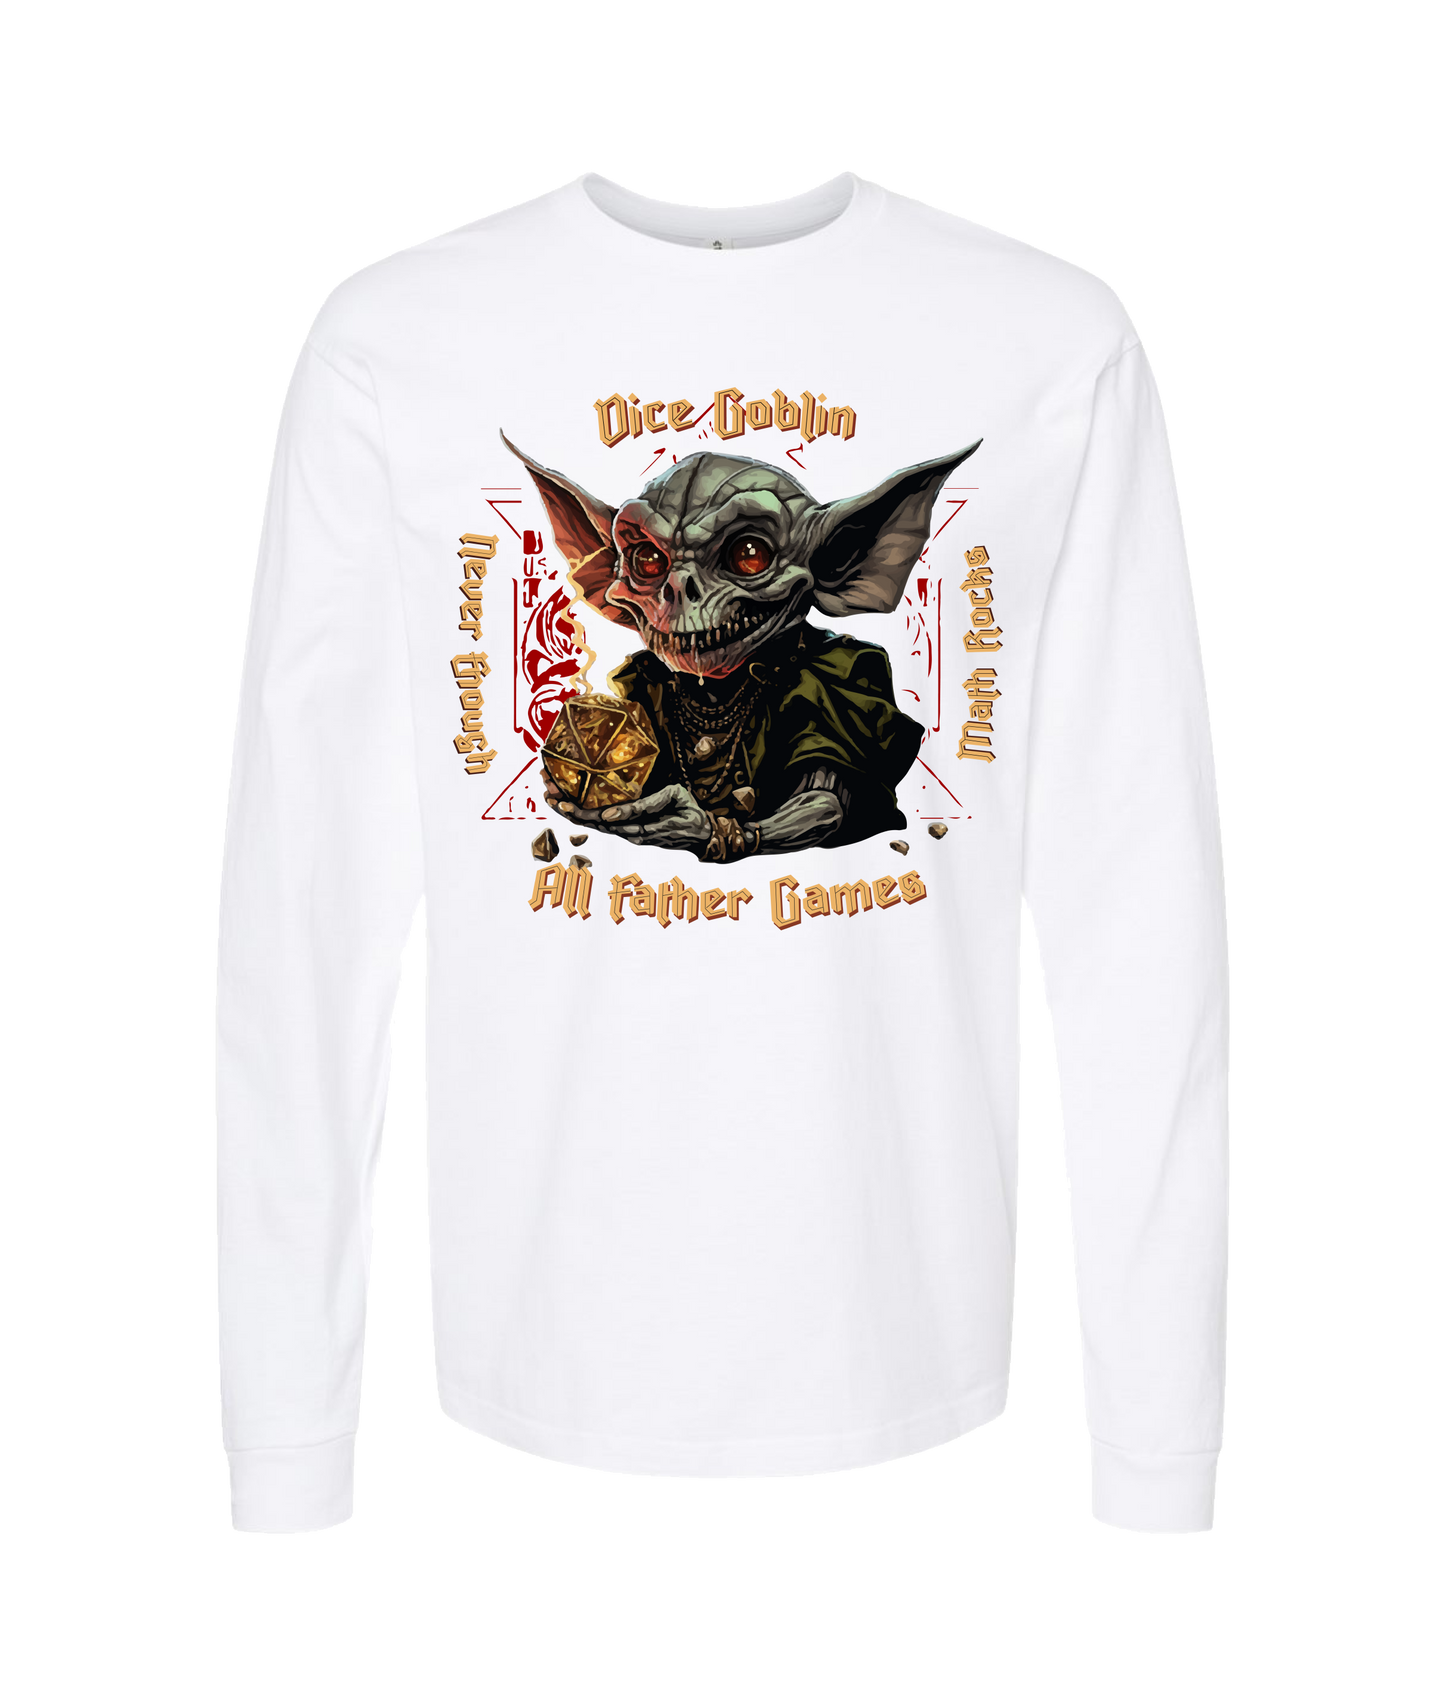 All Father Games - DICE GOBLIN - White Long Sleeve T